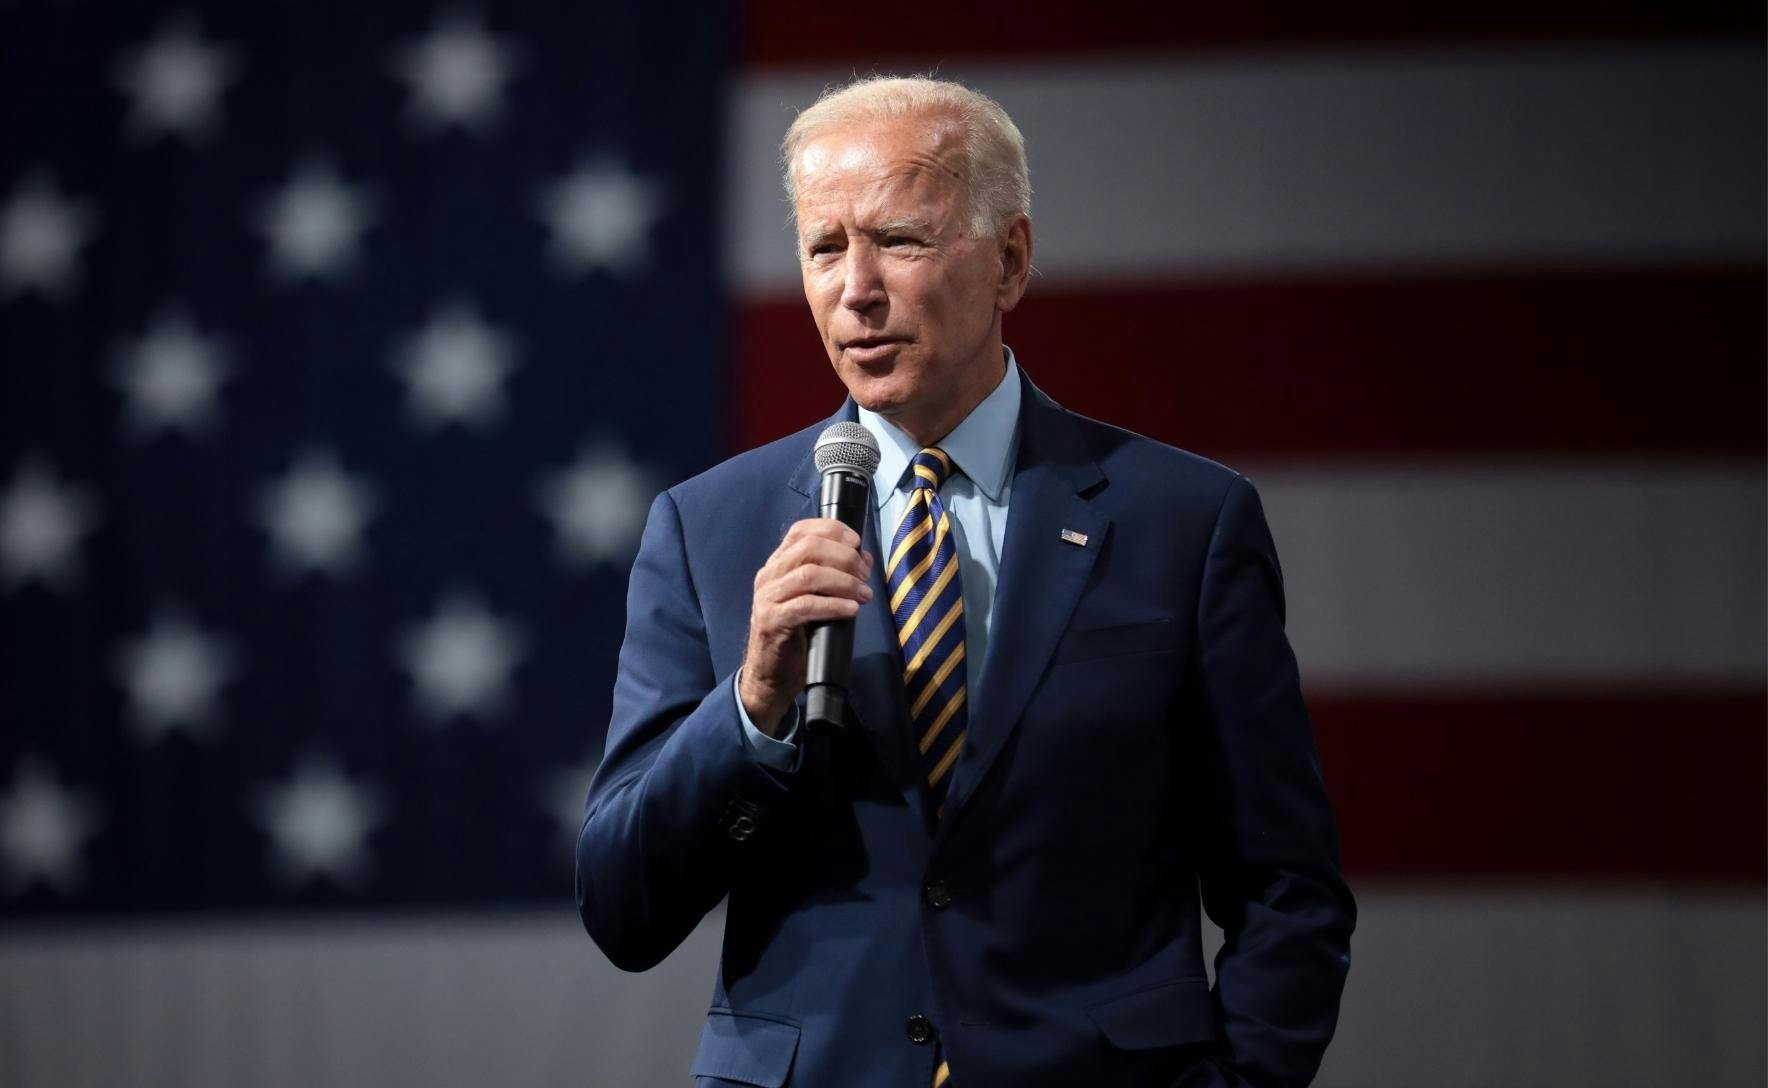 Jo Biden is wearing a dark blue suit and yellow and blue striped tie. He is holding a microphone and mid speech. Behind him is the US flag